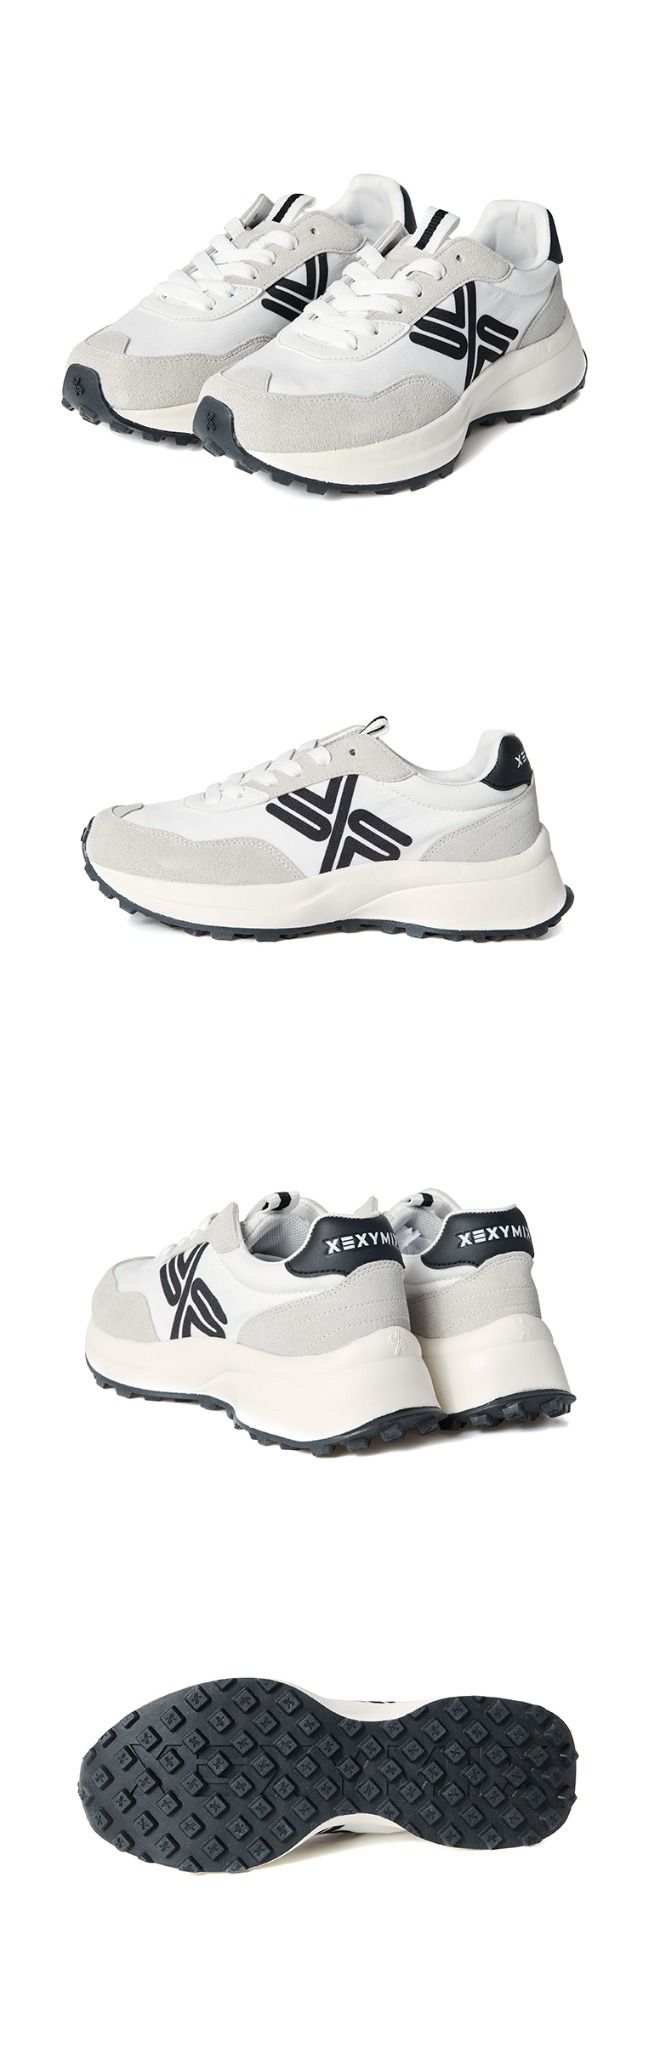  XEB219C_Day Light Jogger Shoes_Stone White 